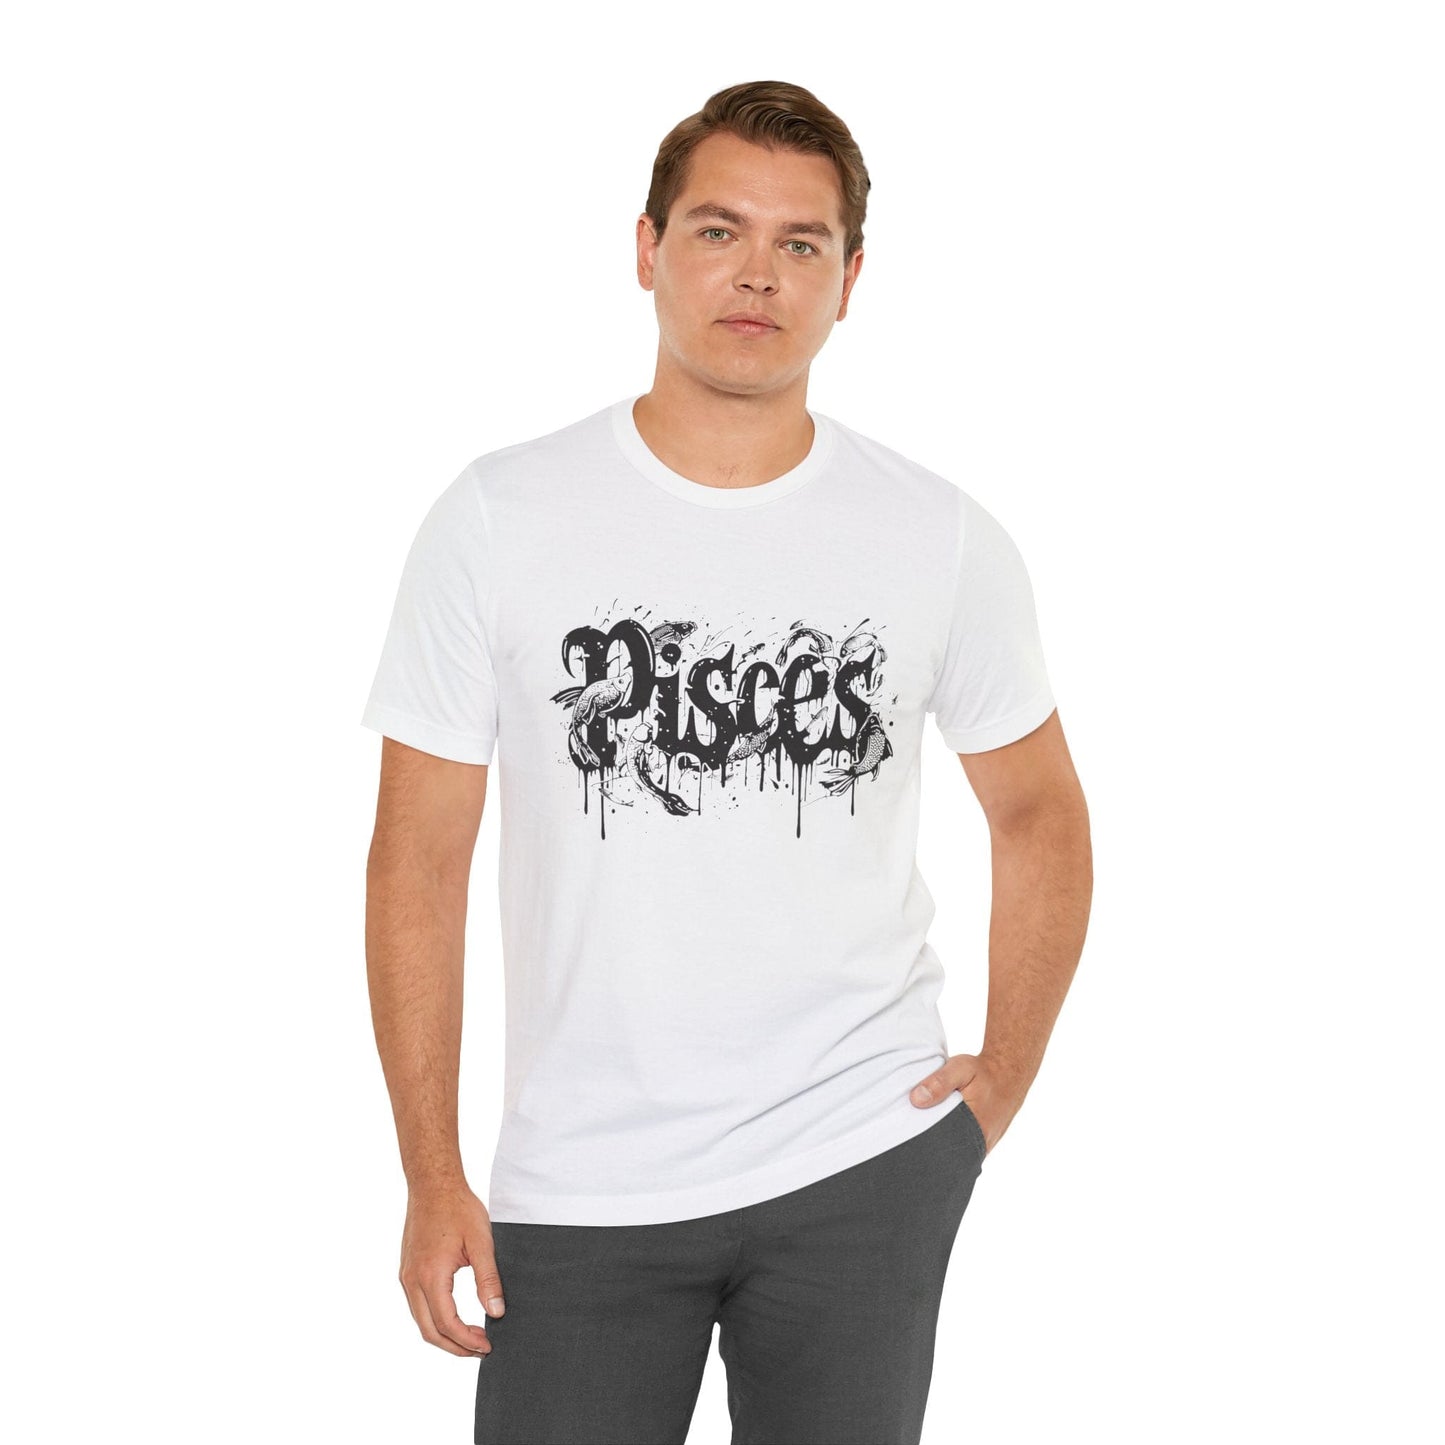 T-Shirt Deep Dive Pisces TShirt: Immerse in the Artistic Tide